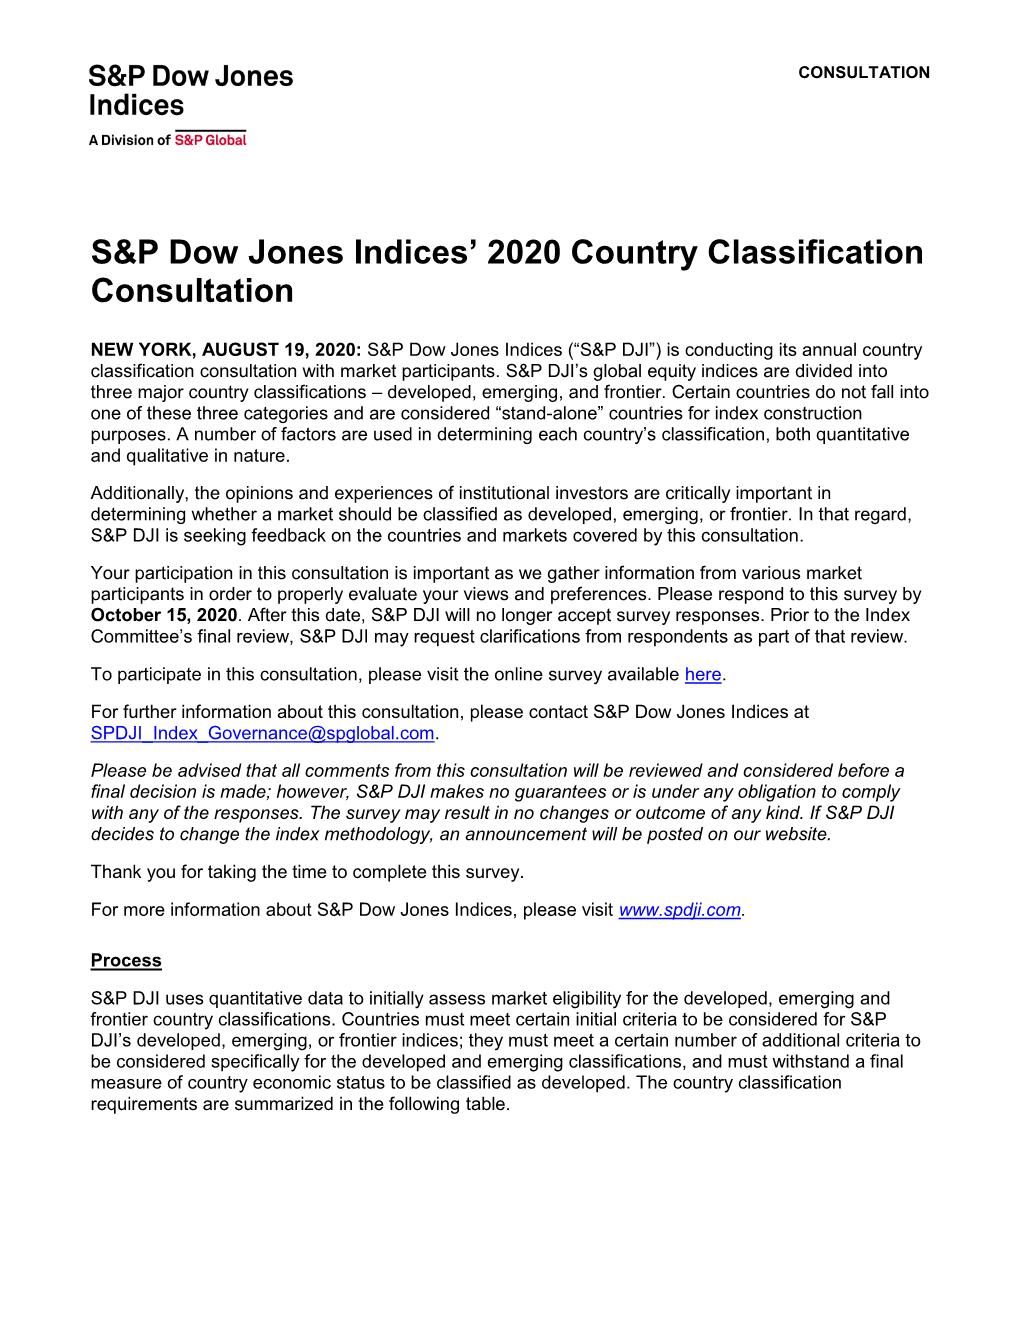 S&P Dow Jones Indices' 2020 Country Classification Consultation